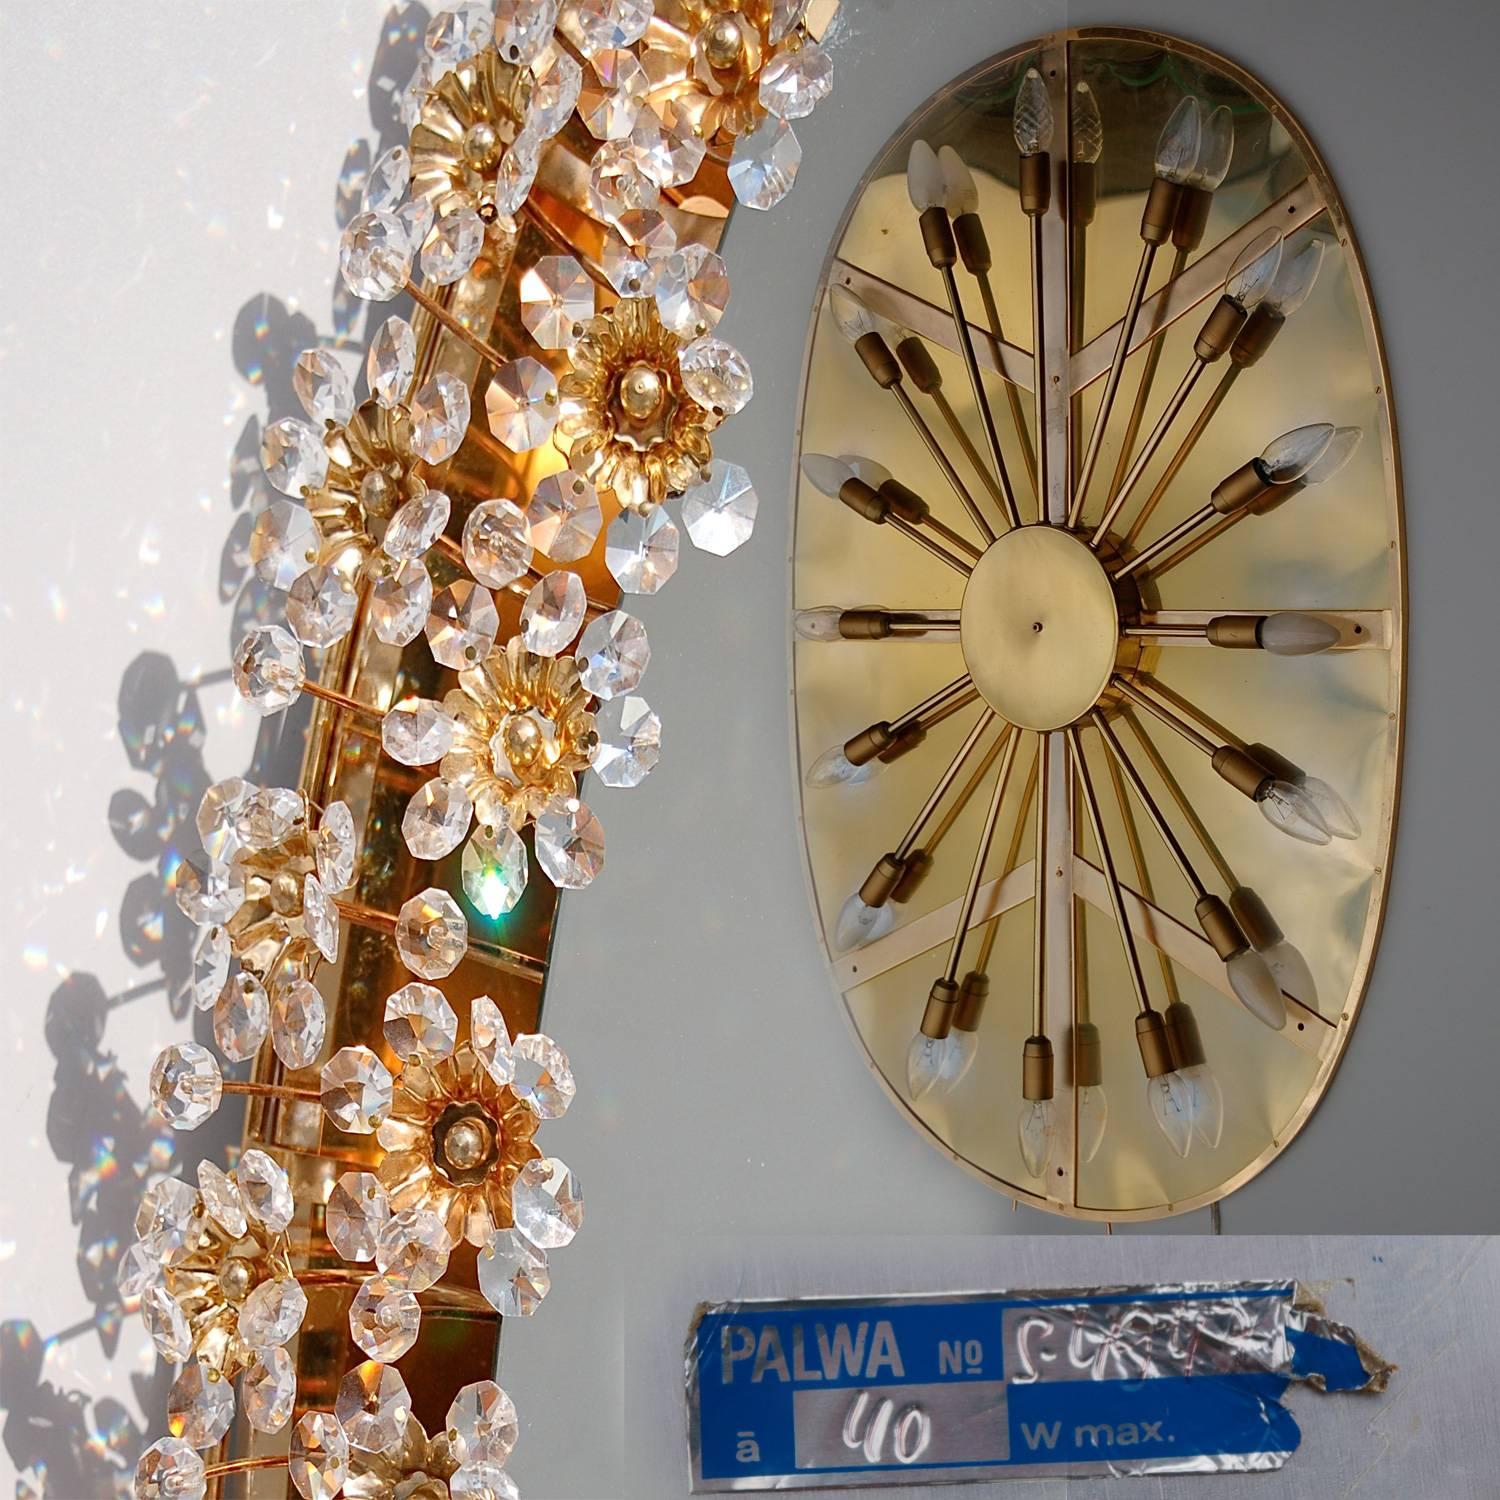 Stunning Mid-Century illuminated oval glass mirror by German manufacturer Palwa. The gilt brass frame is decorated with delicate flowers made from faceted crystals and beads. The center of the flower is finished with a gold-plated detail bolting the